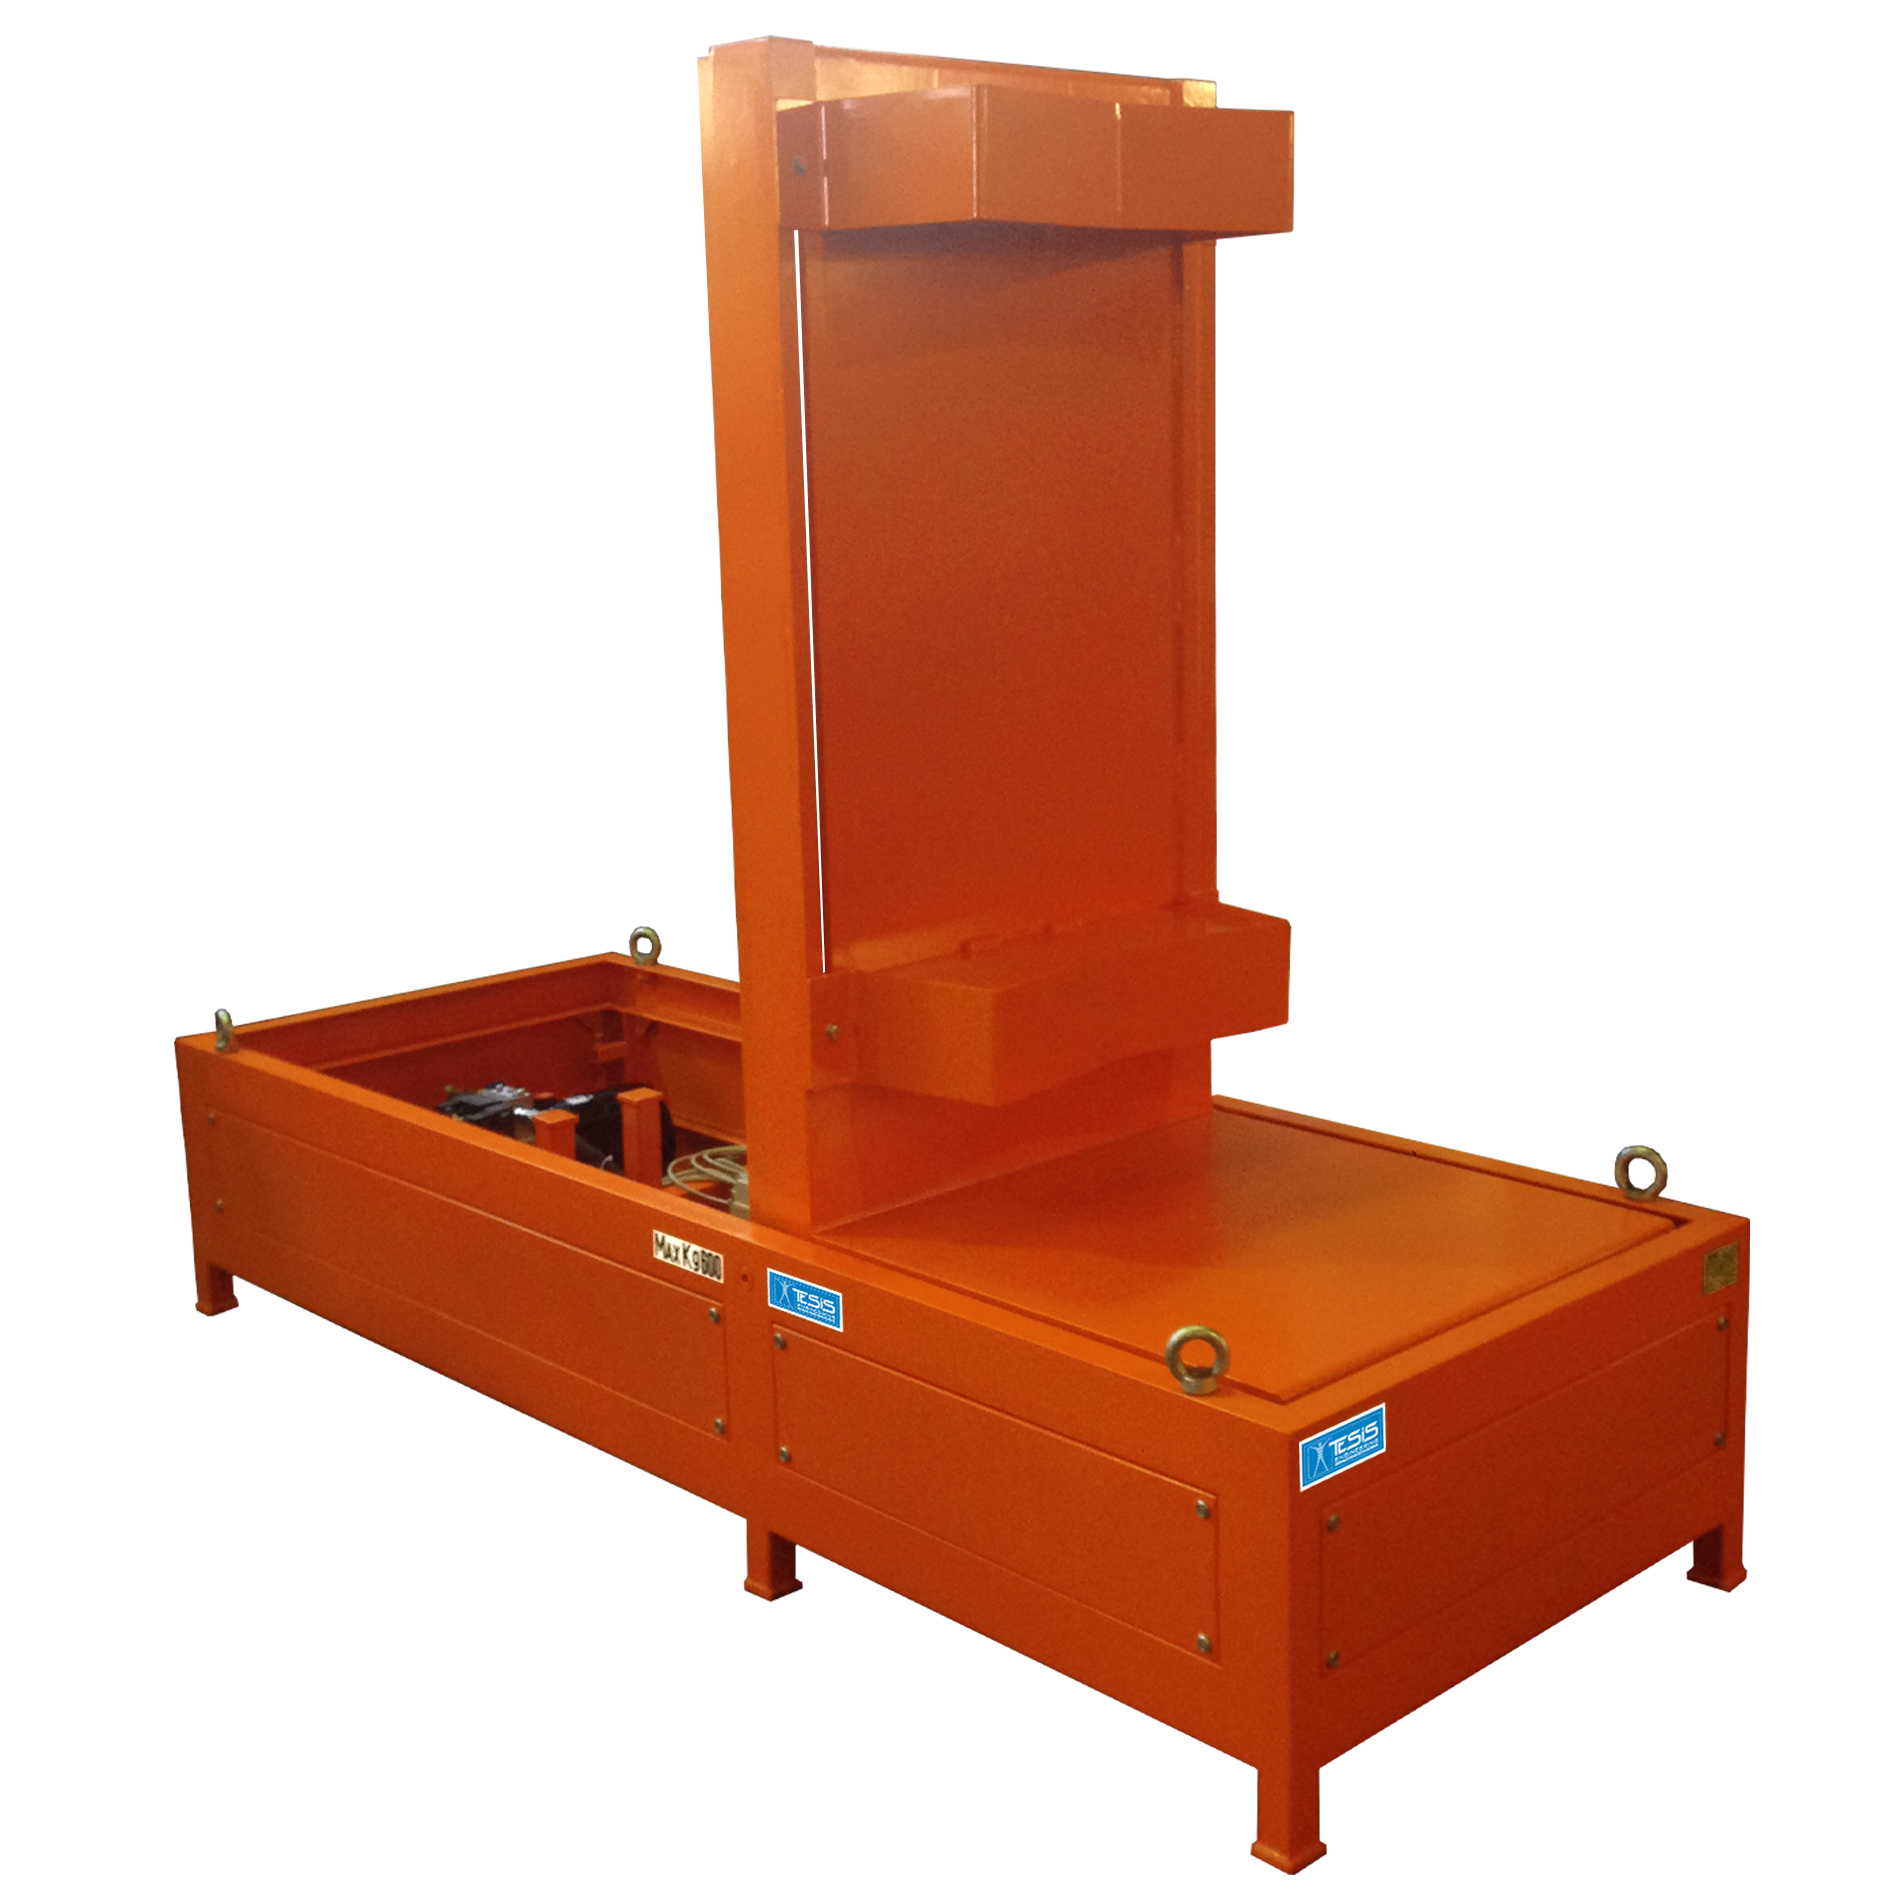 Hydraulic tilter with solid decks & adjustable V supports for coils, coil upender, roll tipper, coil handling equipment, roll handling equipment, tiltables